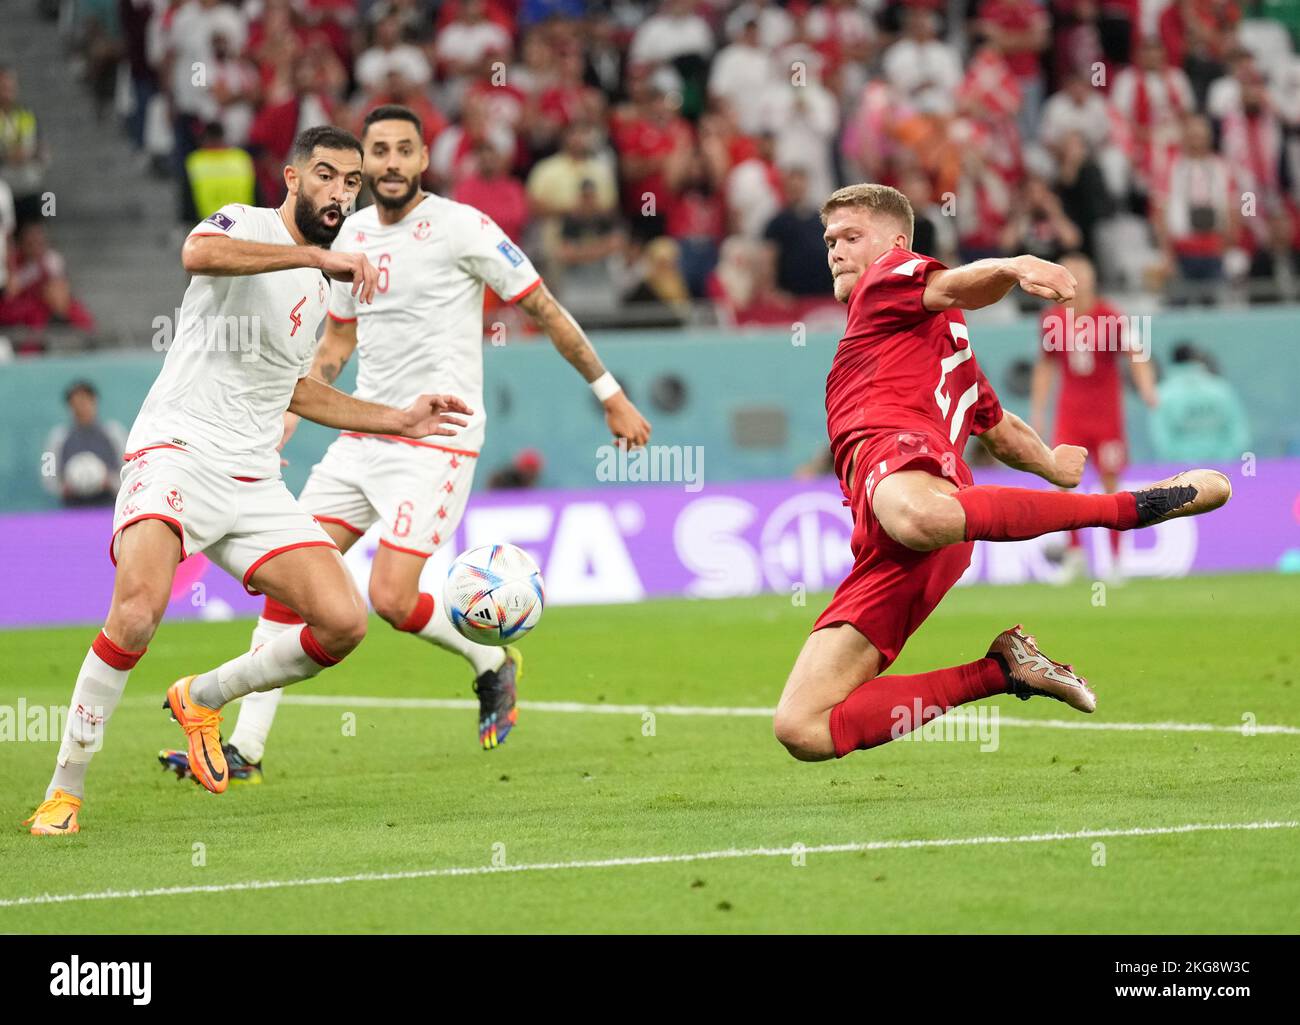 Al Rayyan, Qatar. 22nd Nov, 2022. Andreas Cornelius (R) of Denmark vies with Yassine Meriah (L) of Tunisia during the Group D match between Denmark and Tunisia at the 2022 FIFA World Cup at Education City Stadium in Al Rayyan, Qatar, Nov. 22, 2022. Credit: Zheng Huansong/Xinhua/Alamy Live News Stock Photo